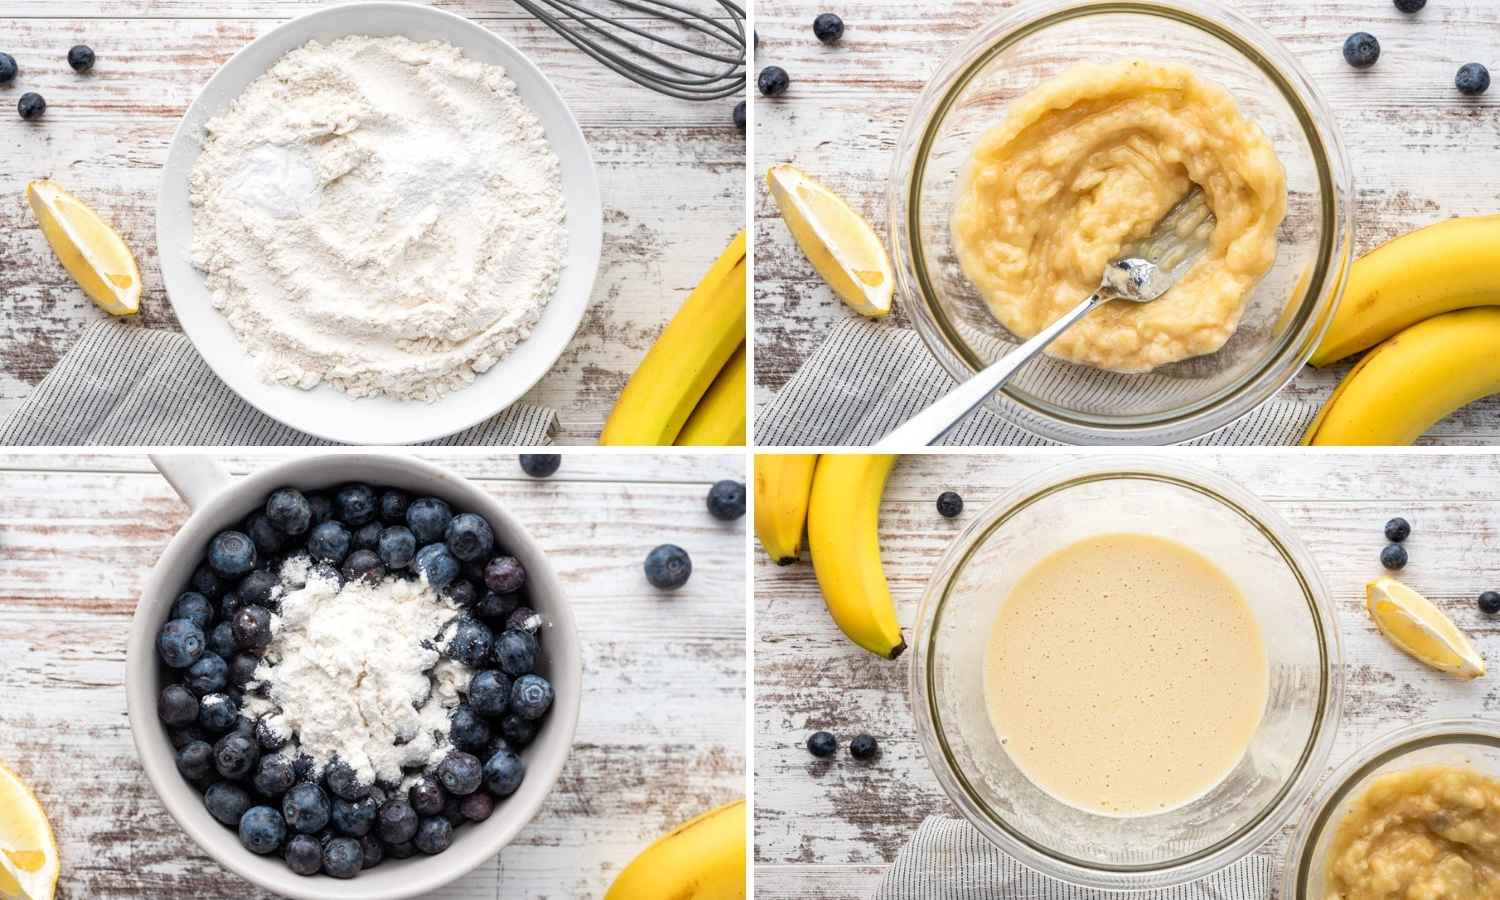 Collage of four images showing how to make banana blueberry muffin batter